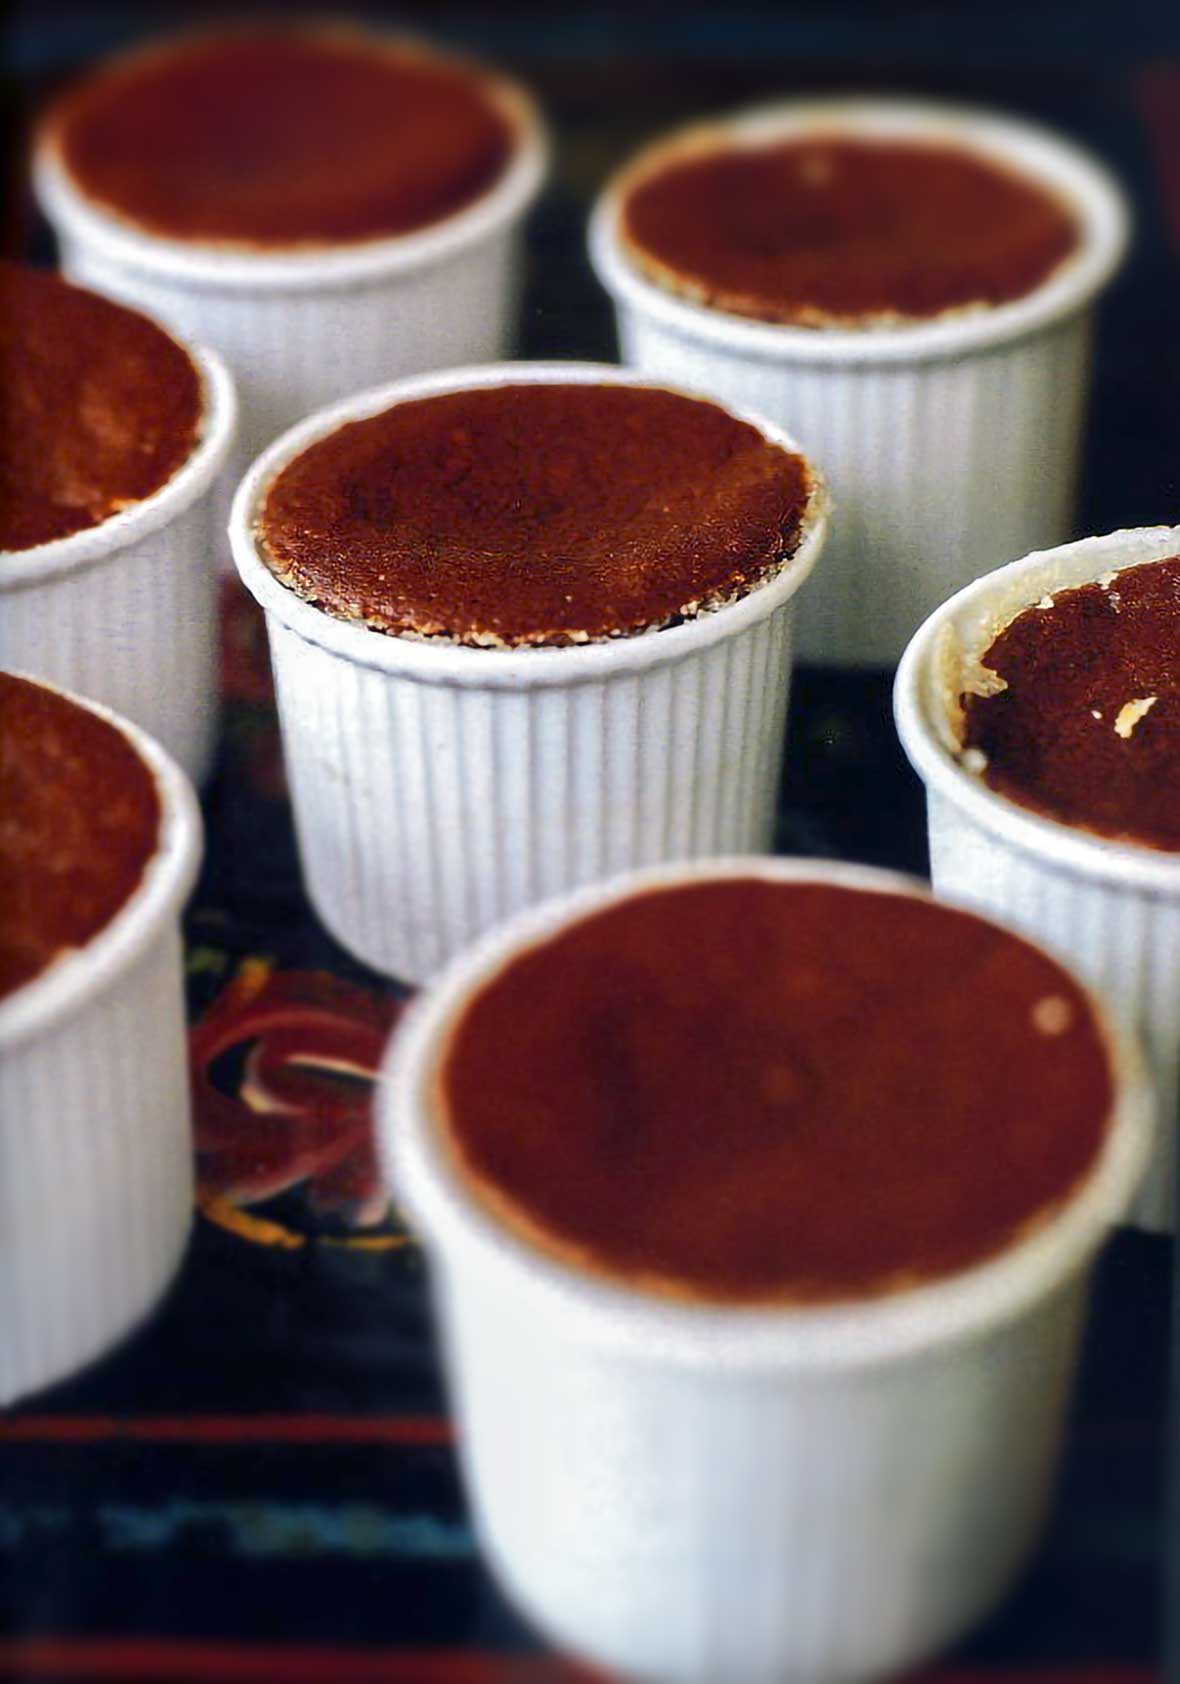 Chile-Spiked Chocolate Cakes Recipe | Leite's Culinaria